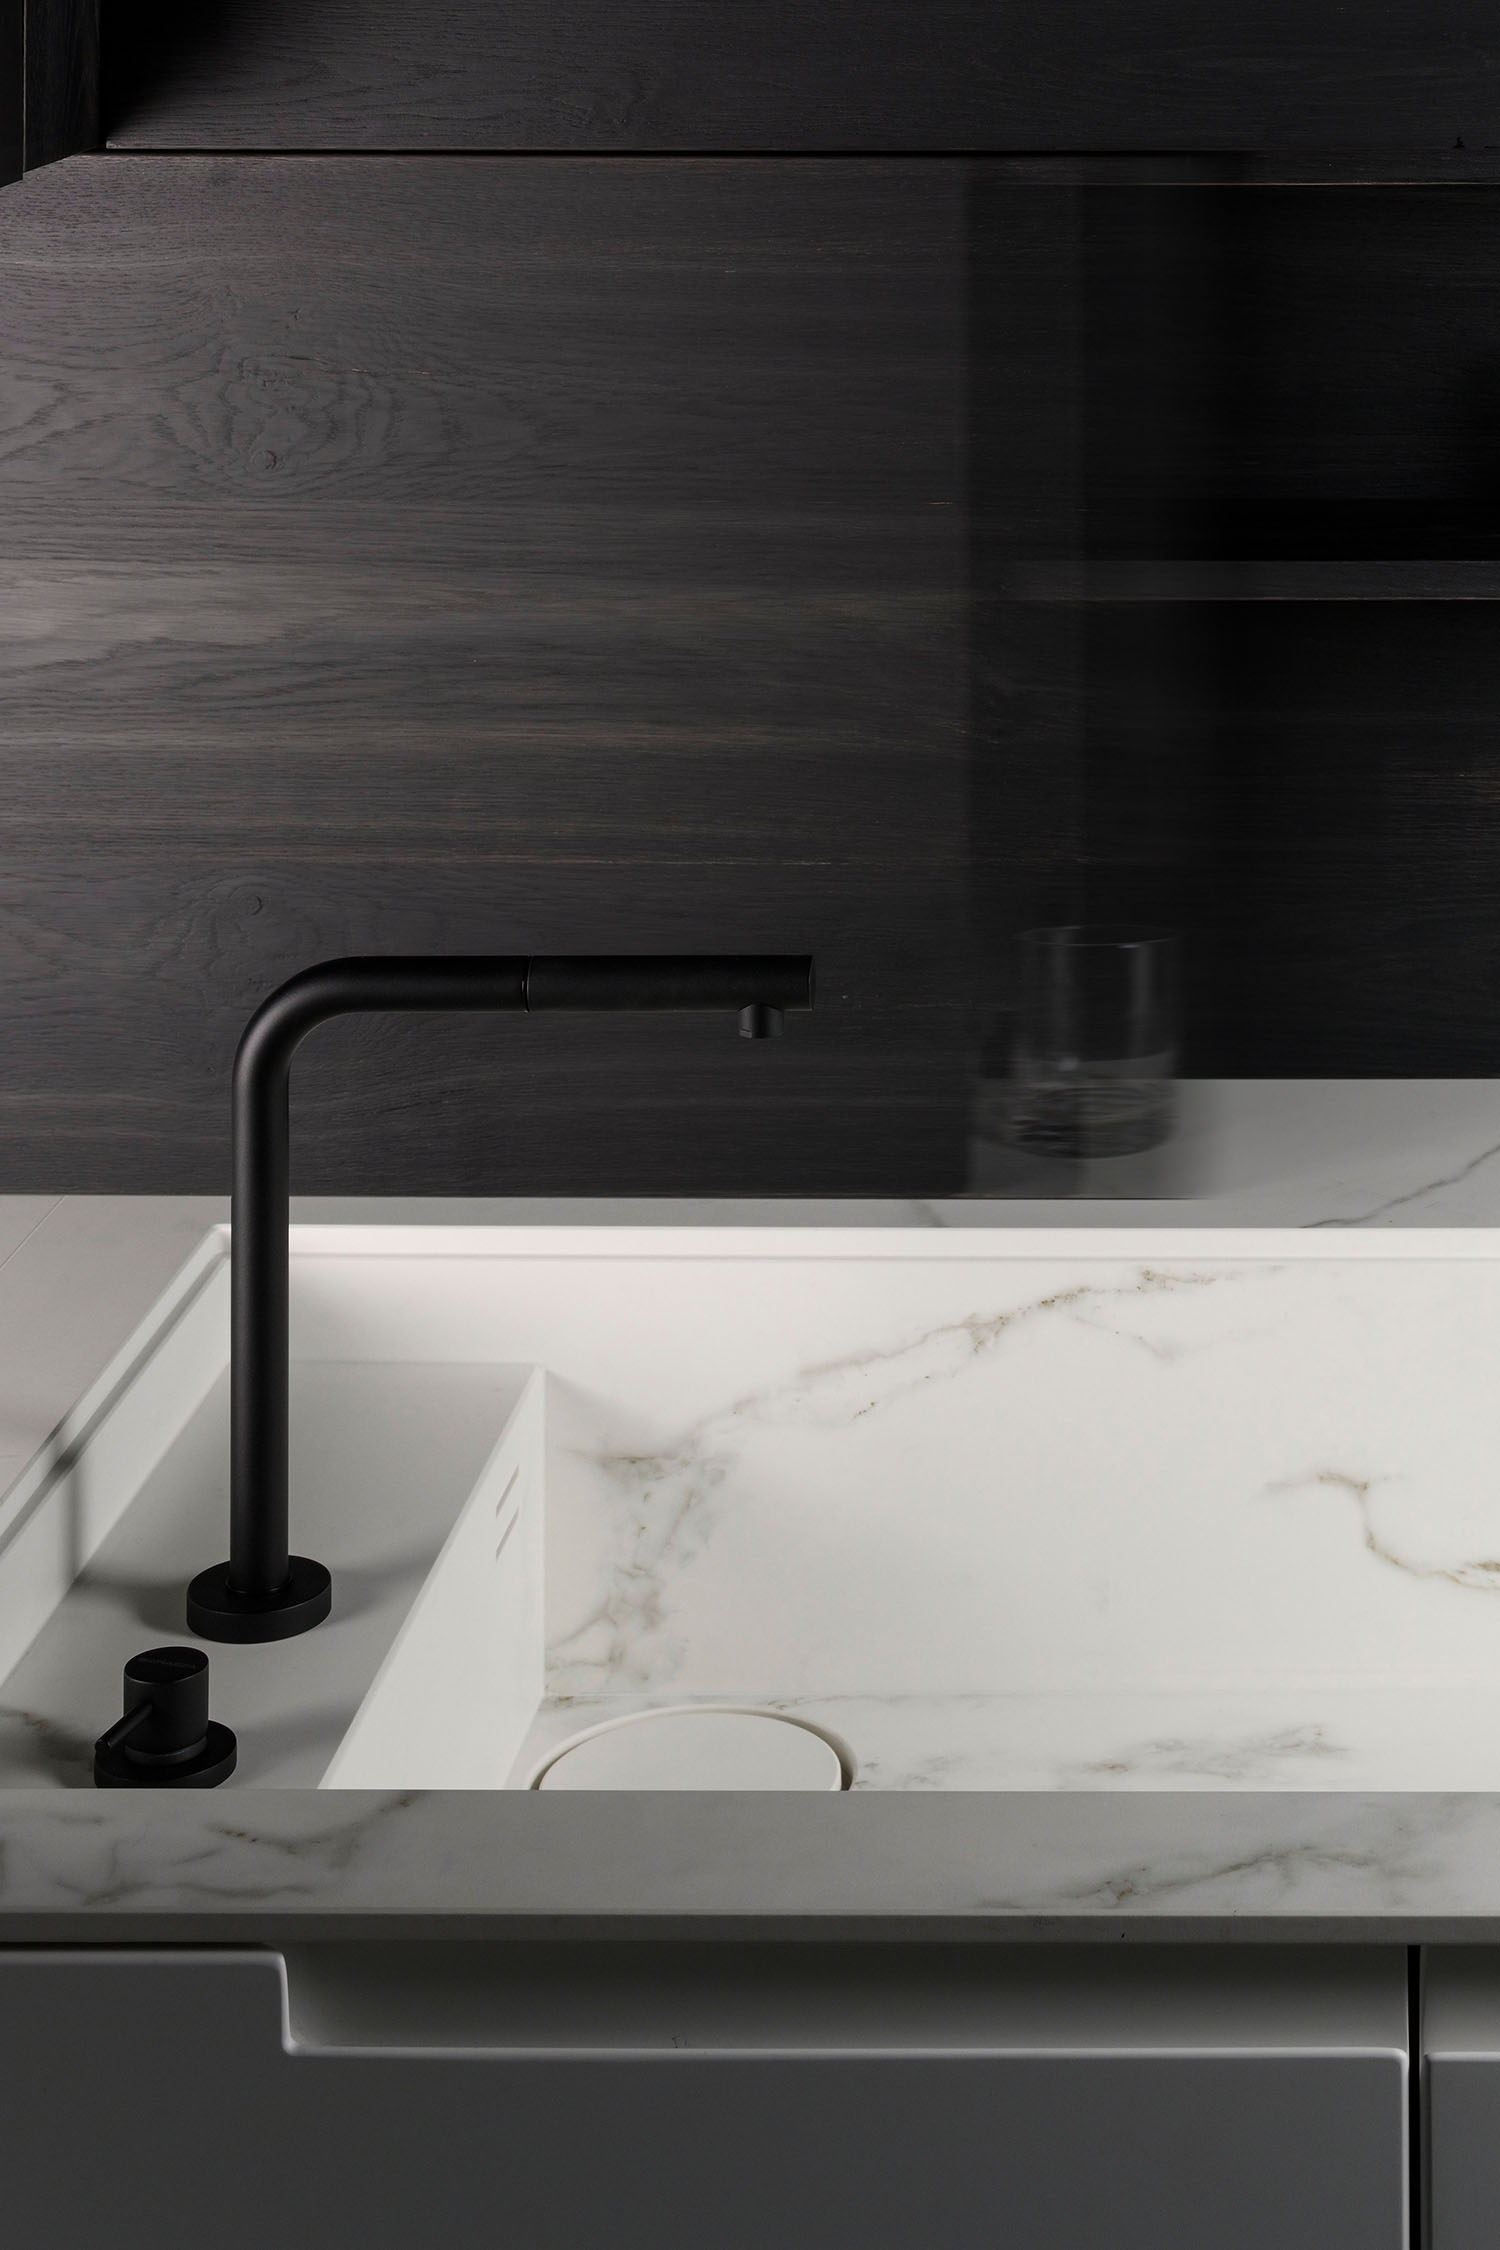 Marble intergrated sink with contrasting black metal kitchen tap.